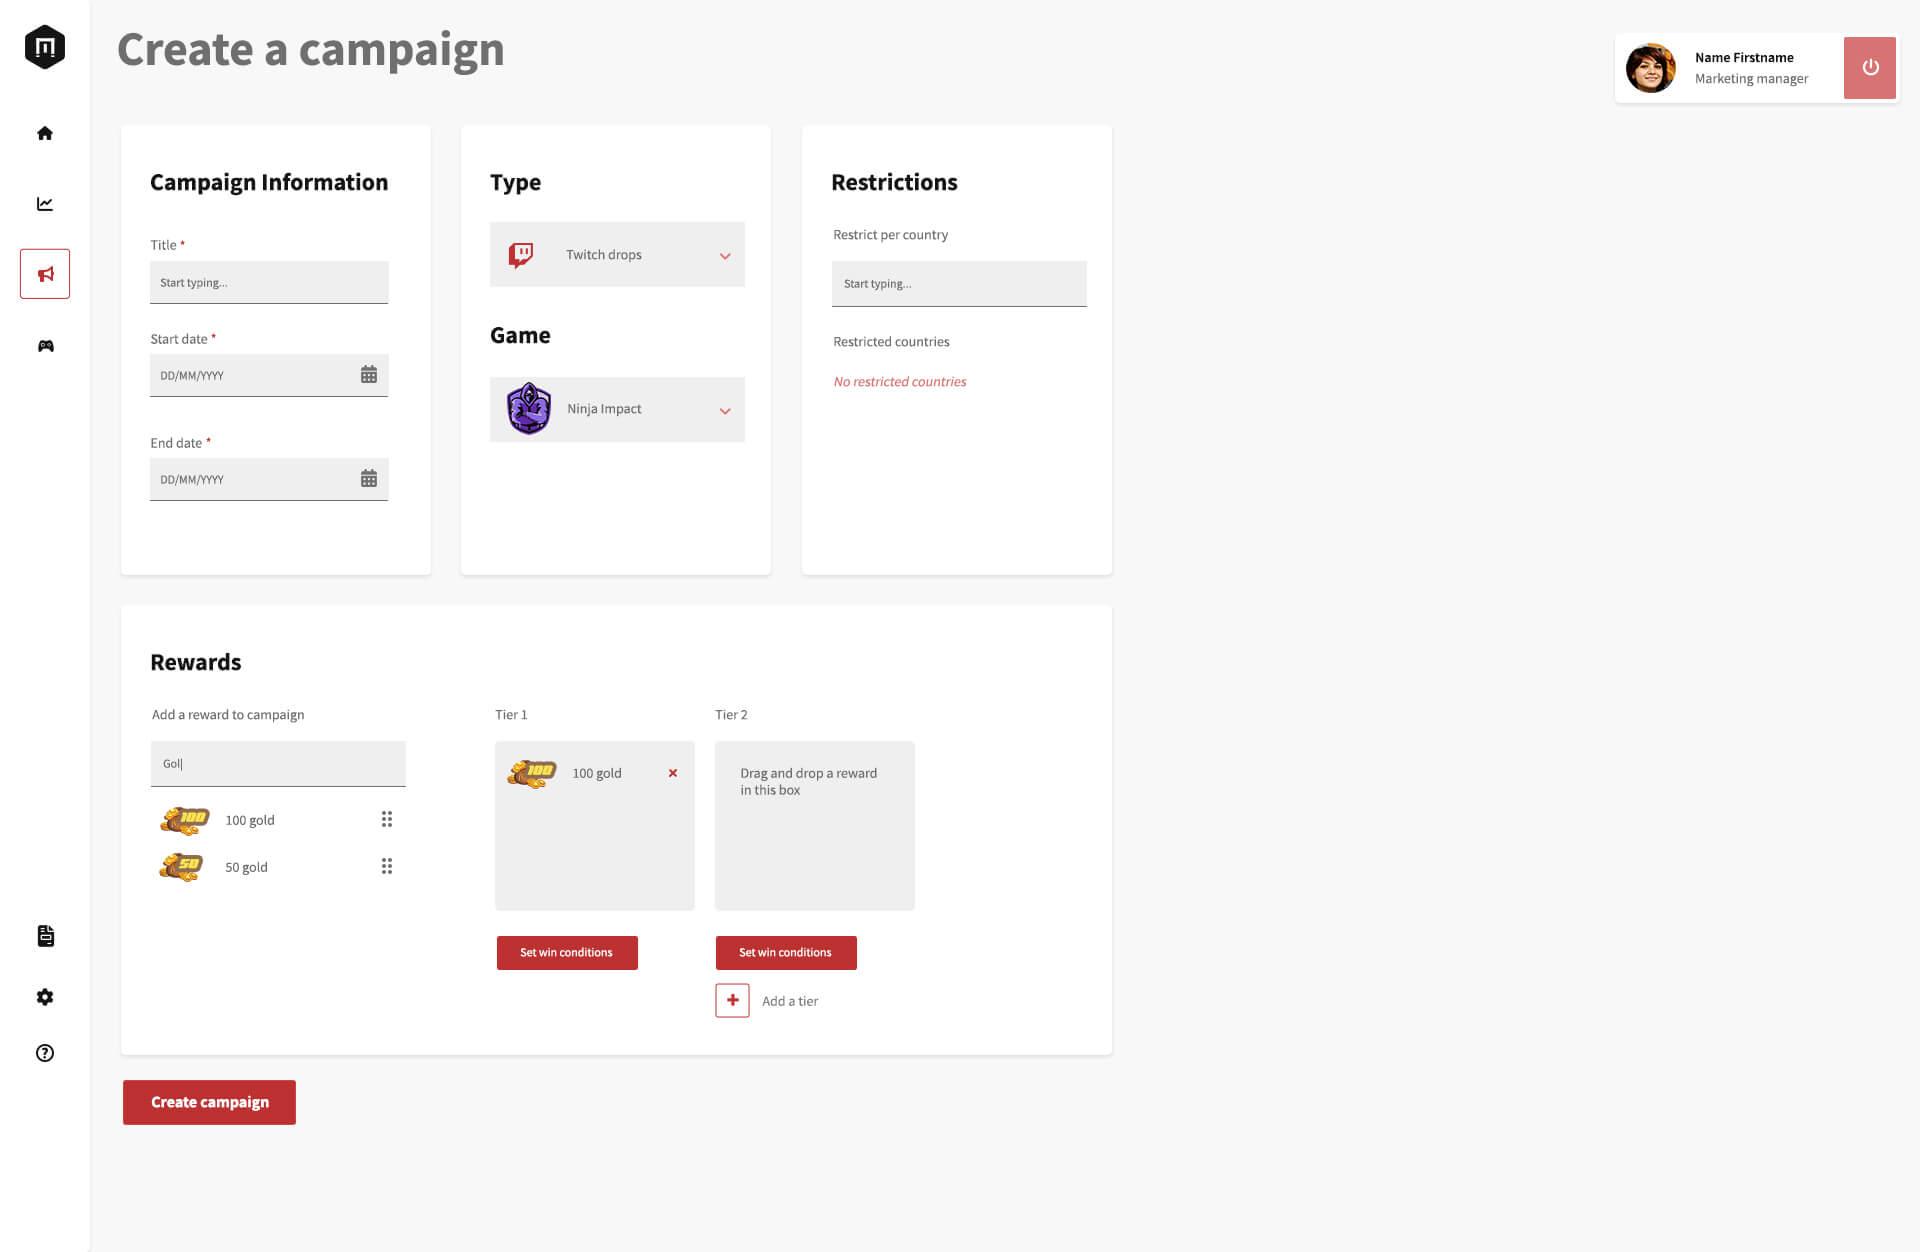 Launch Campaigns in minutes